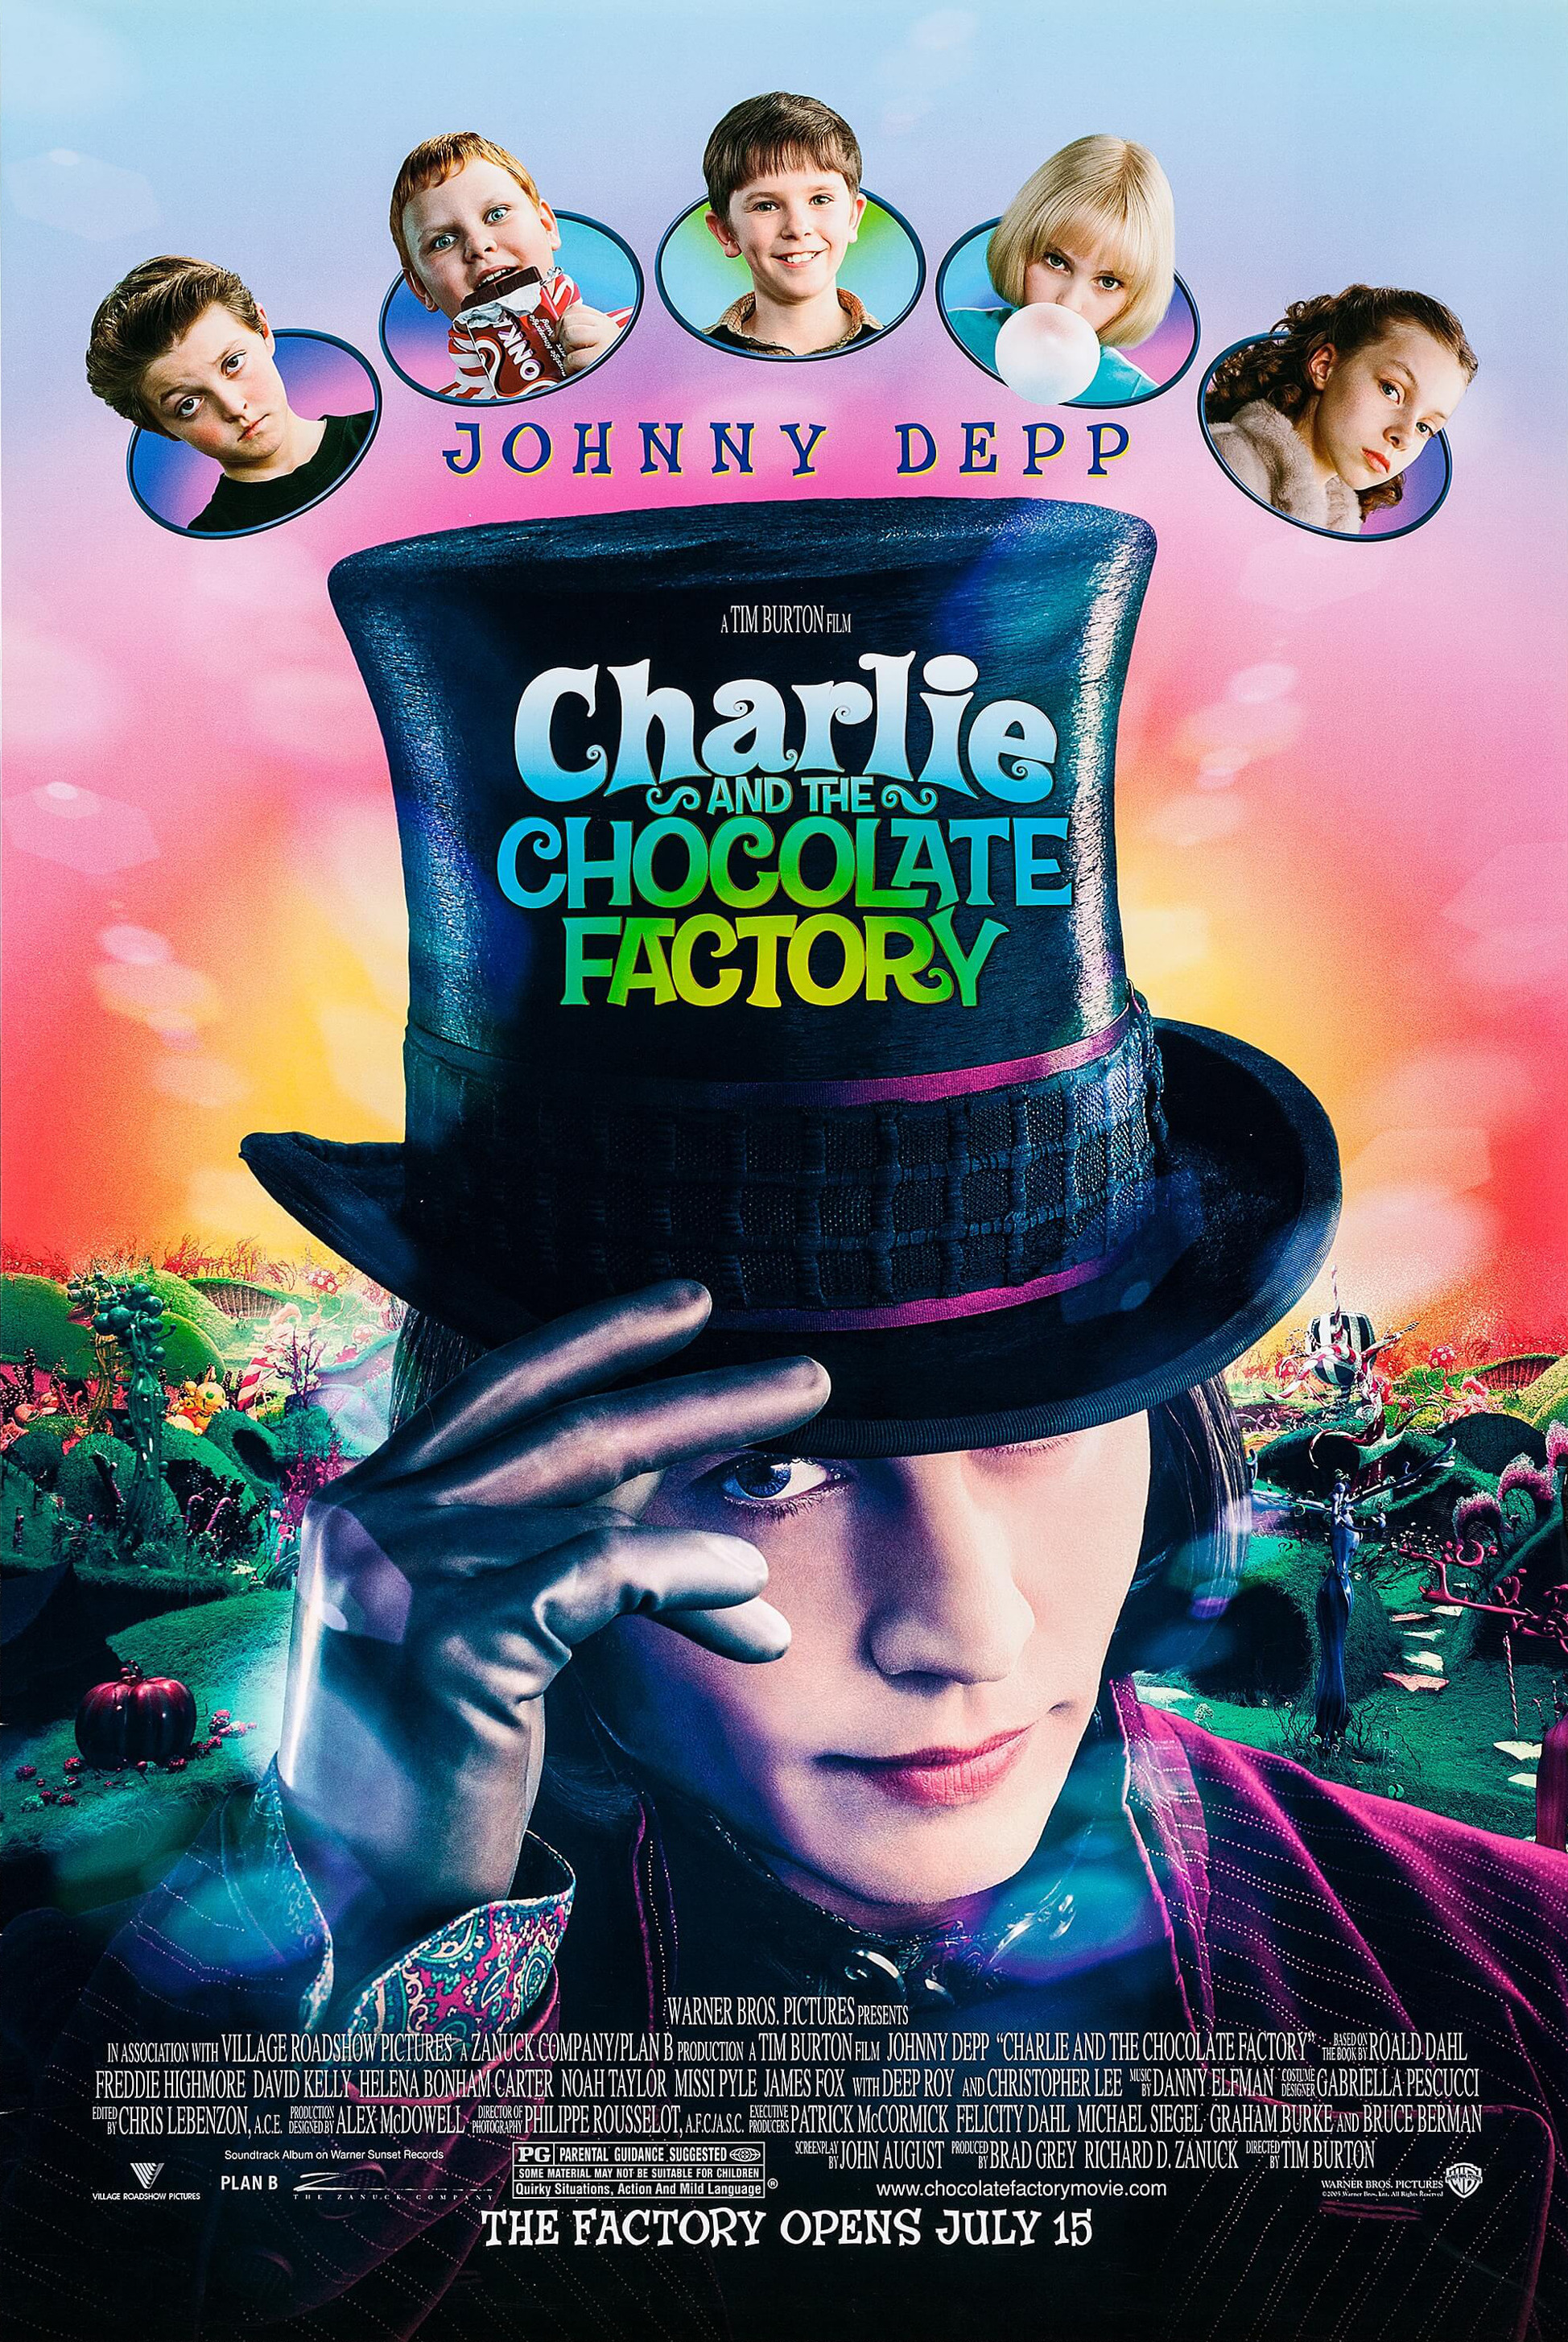 Charlie and the Chocolate Factory (film) Warner Bros picture